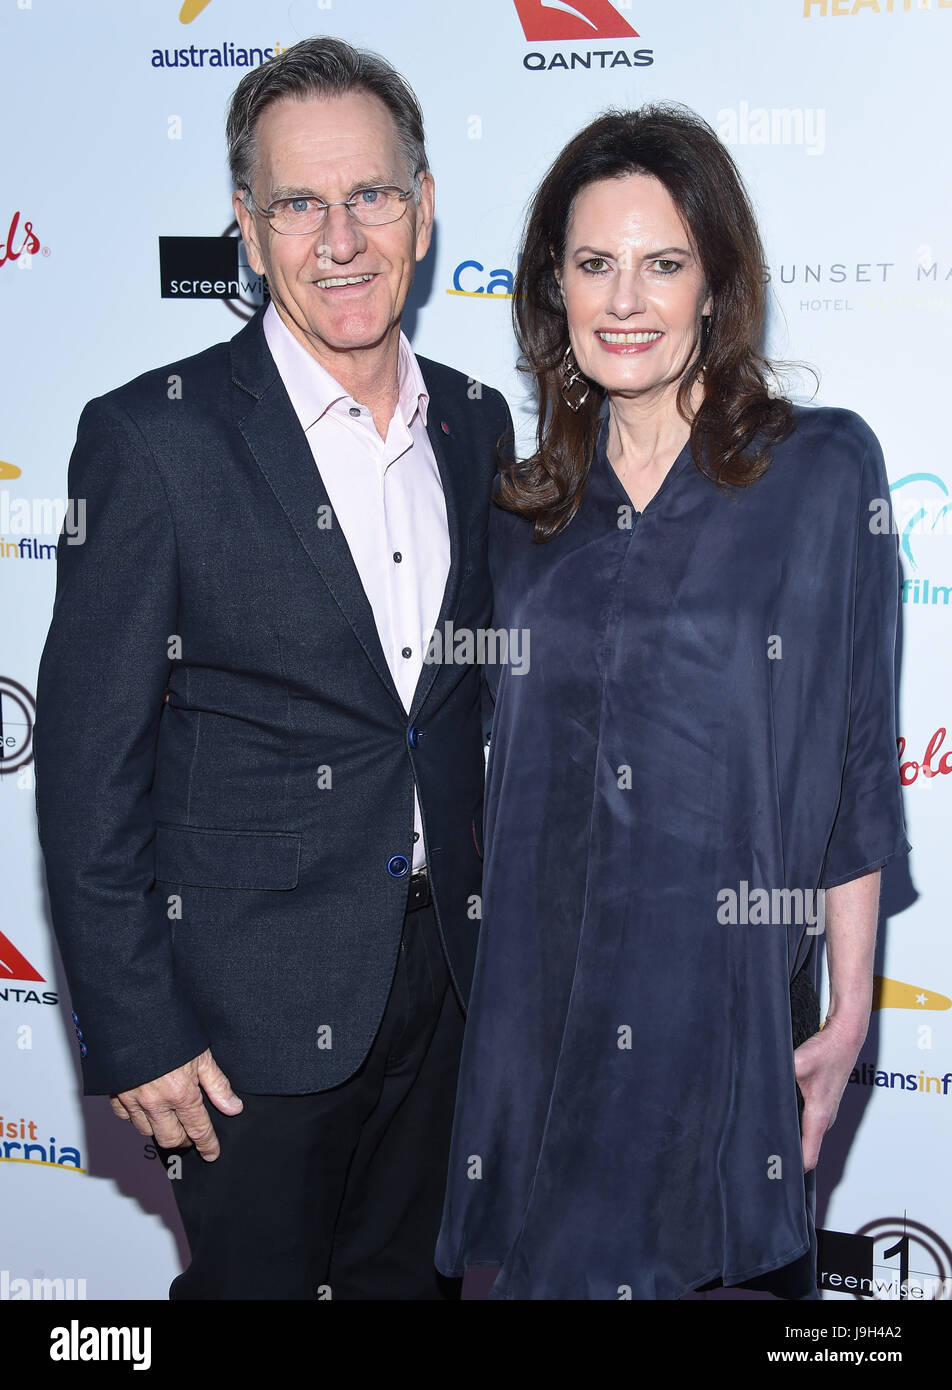 West Hollywood, California, USA. 1st June, 2017. Sally Bell and Roger Bell arrives for the 9th Annual Heath Ledger Scholarship Dinner at the Sunset Marquis Hotel. Credit: Lisa O'Connor/ZUMA Wire/Alamy Live News Stock Photo